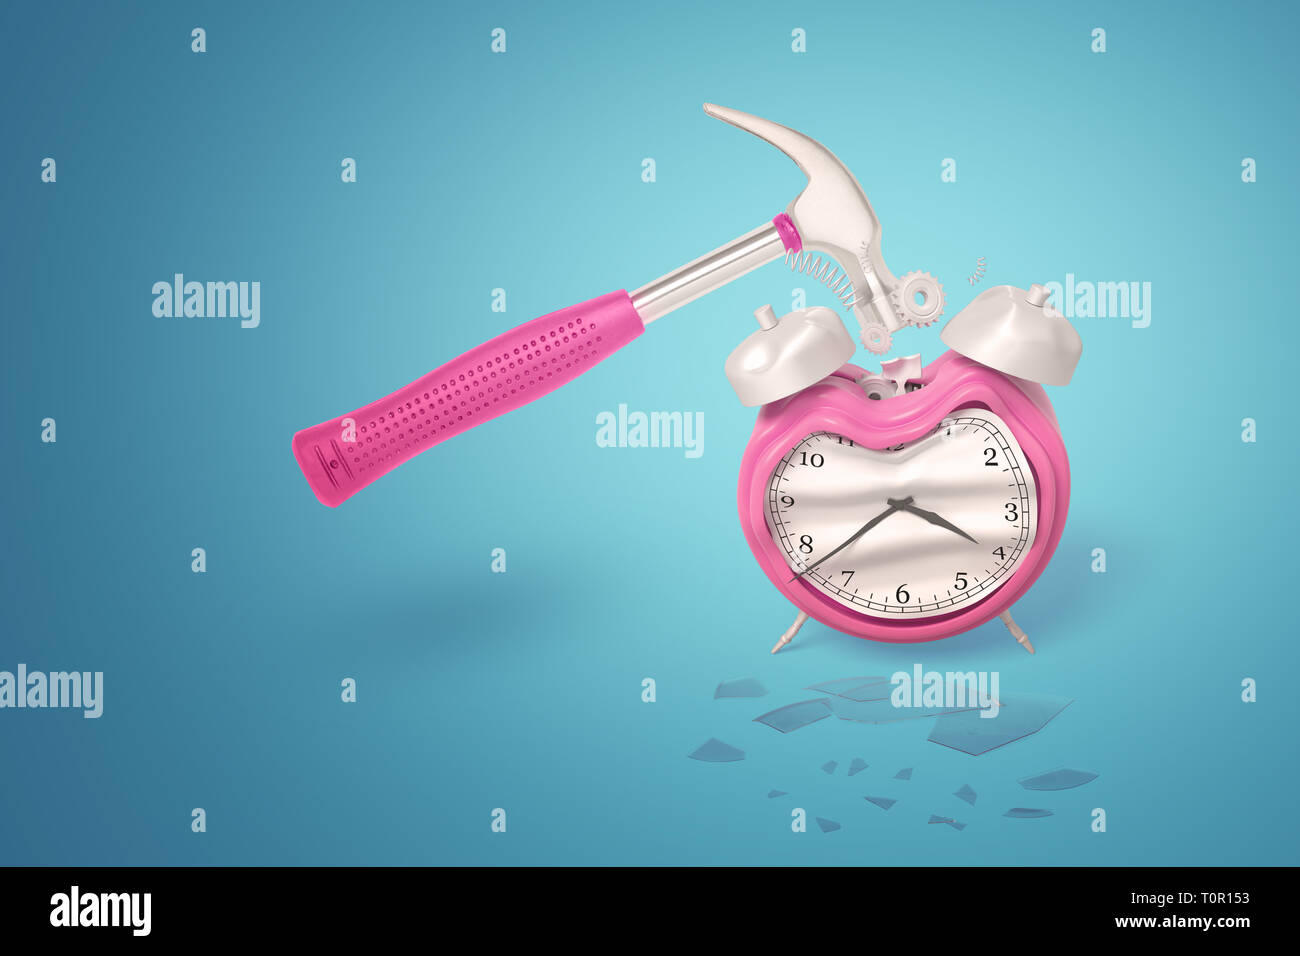 3d rendering of a metal hammer with a pink handle crashing a pink alarm clock on a blue background. Stock Photo